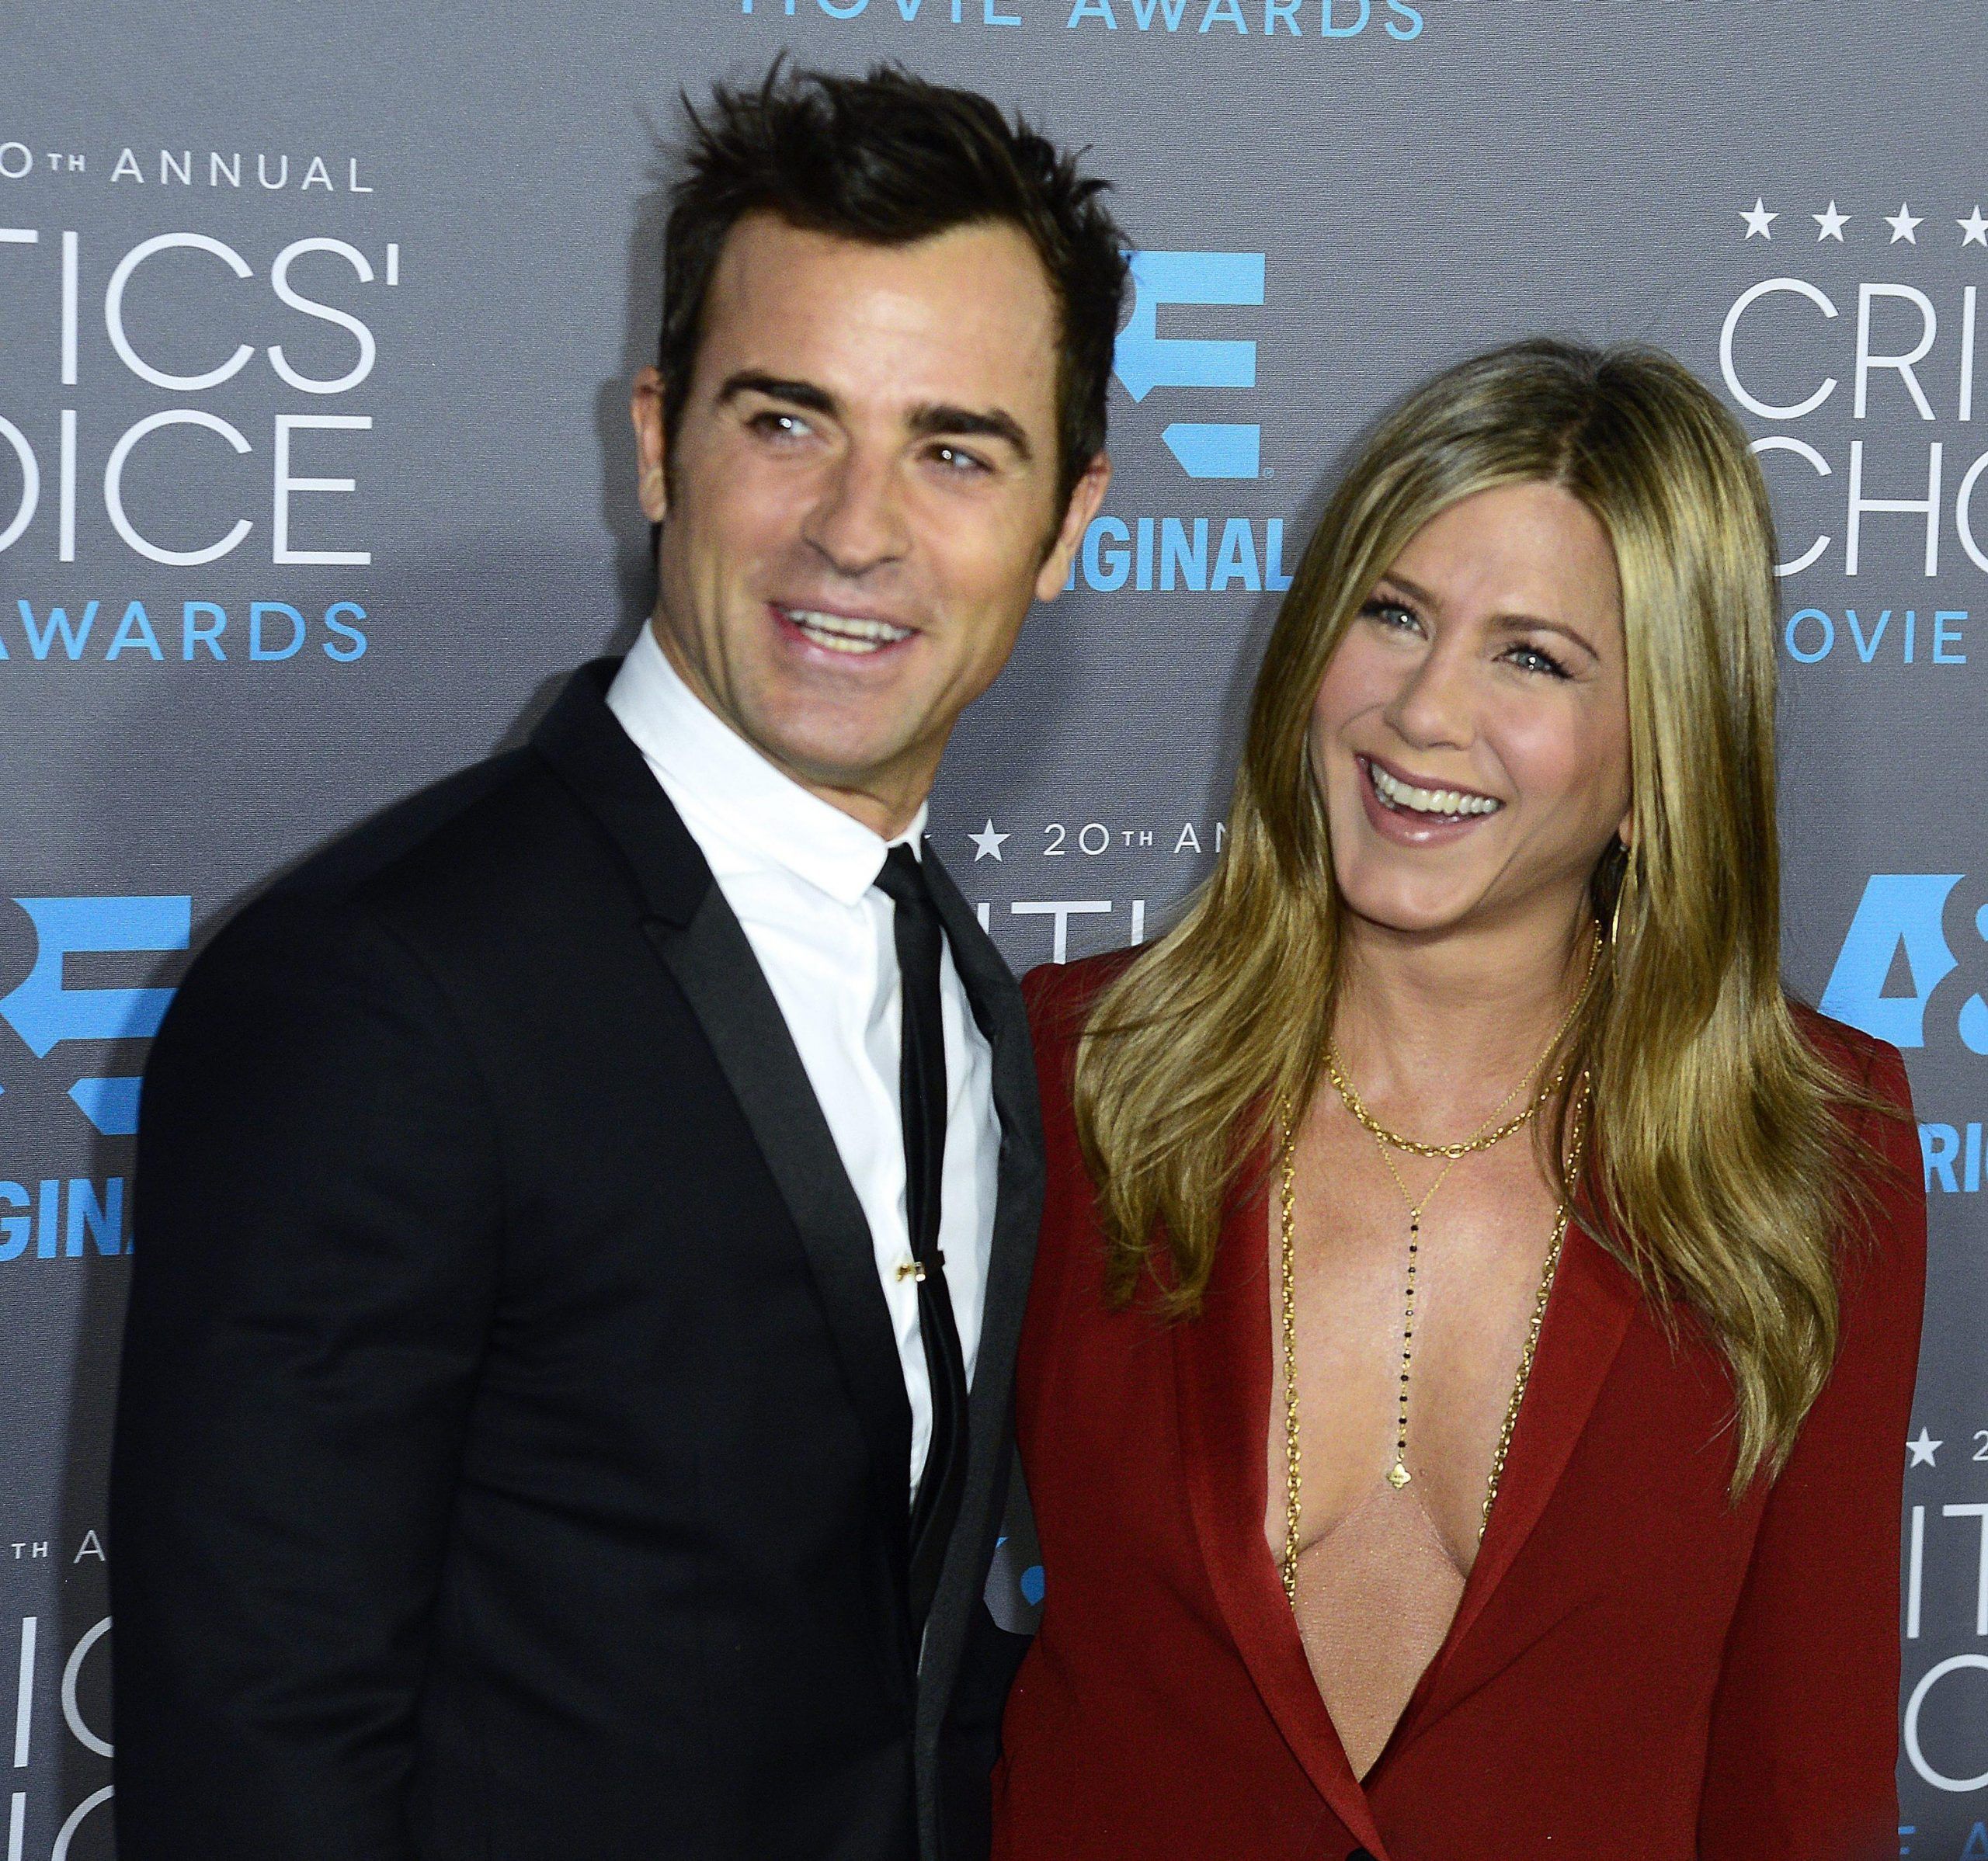 Jennifer Aniston marries Justin Theroux in private Bel Air ceremony